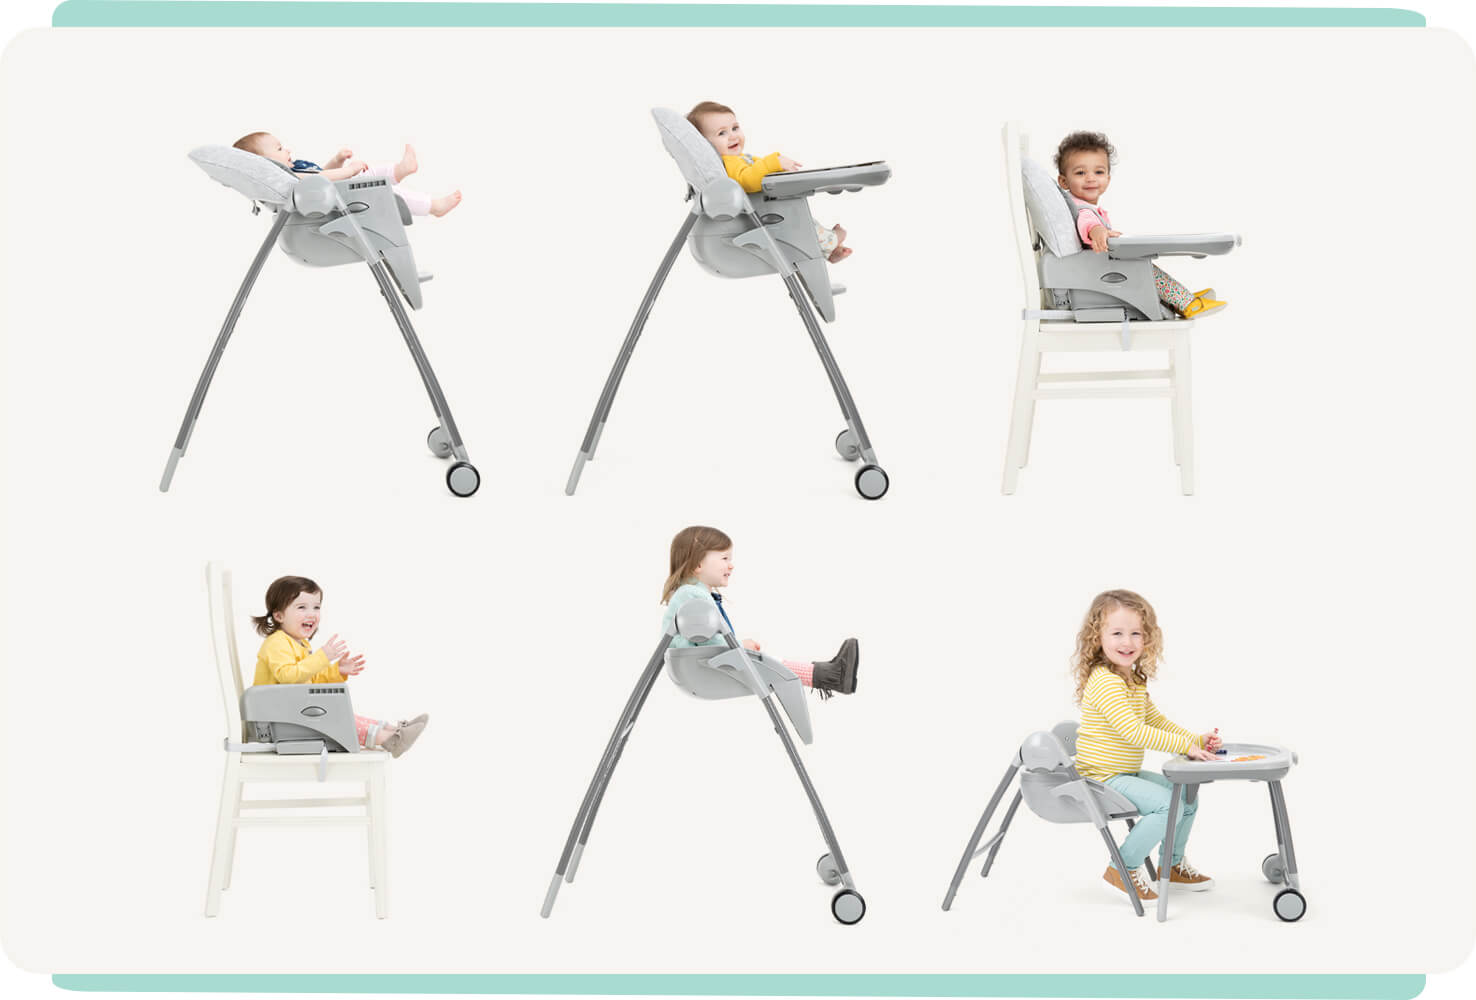 6 multiply highchairs showing reclining, sitting, booster with tray on char, booster without tray on chair, booster on highchair legs, and toddler seat with sitting tray.